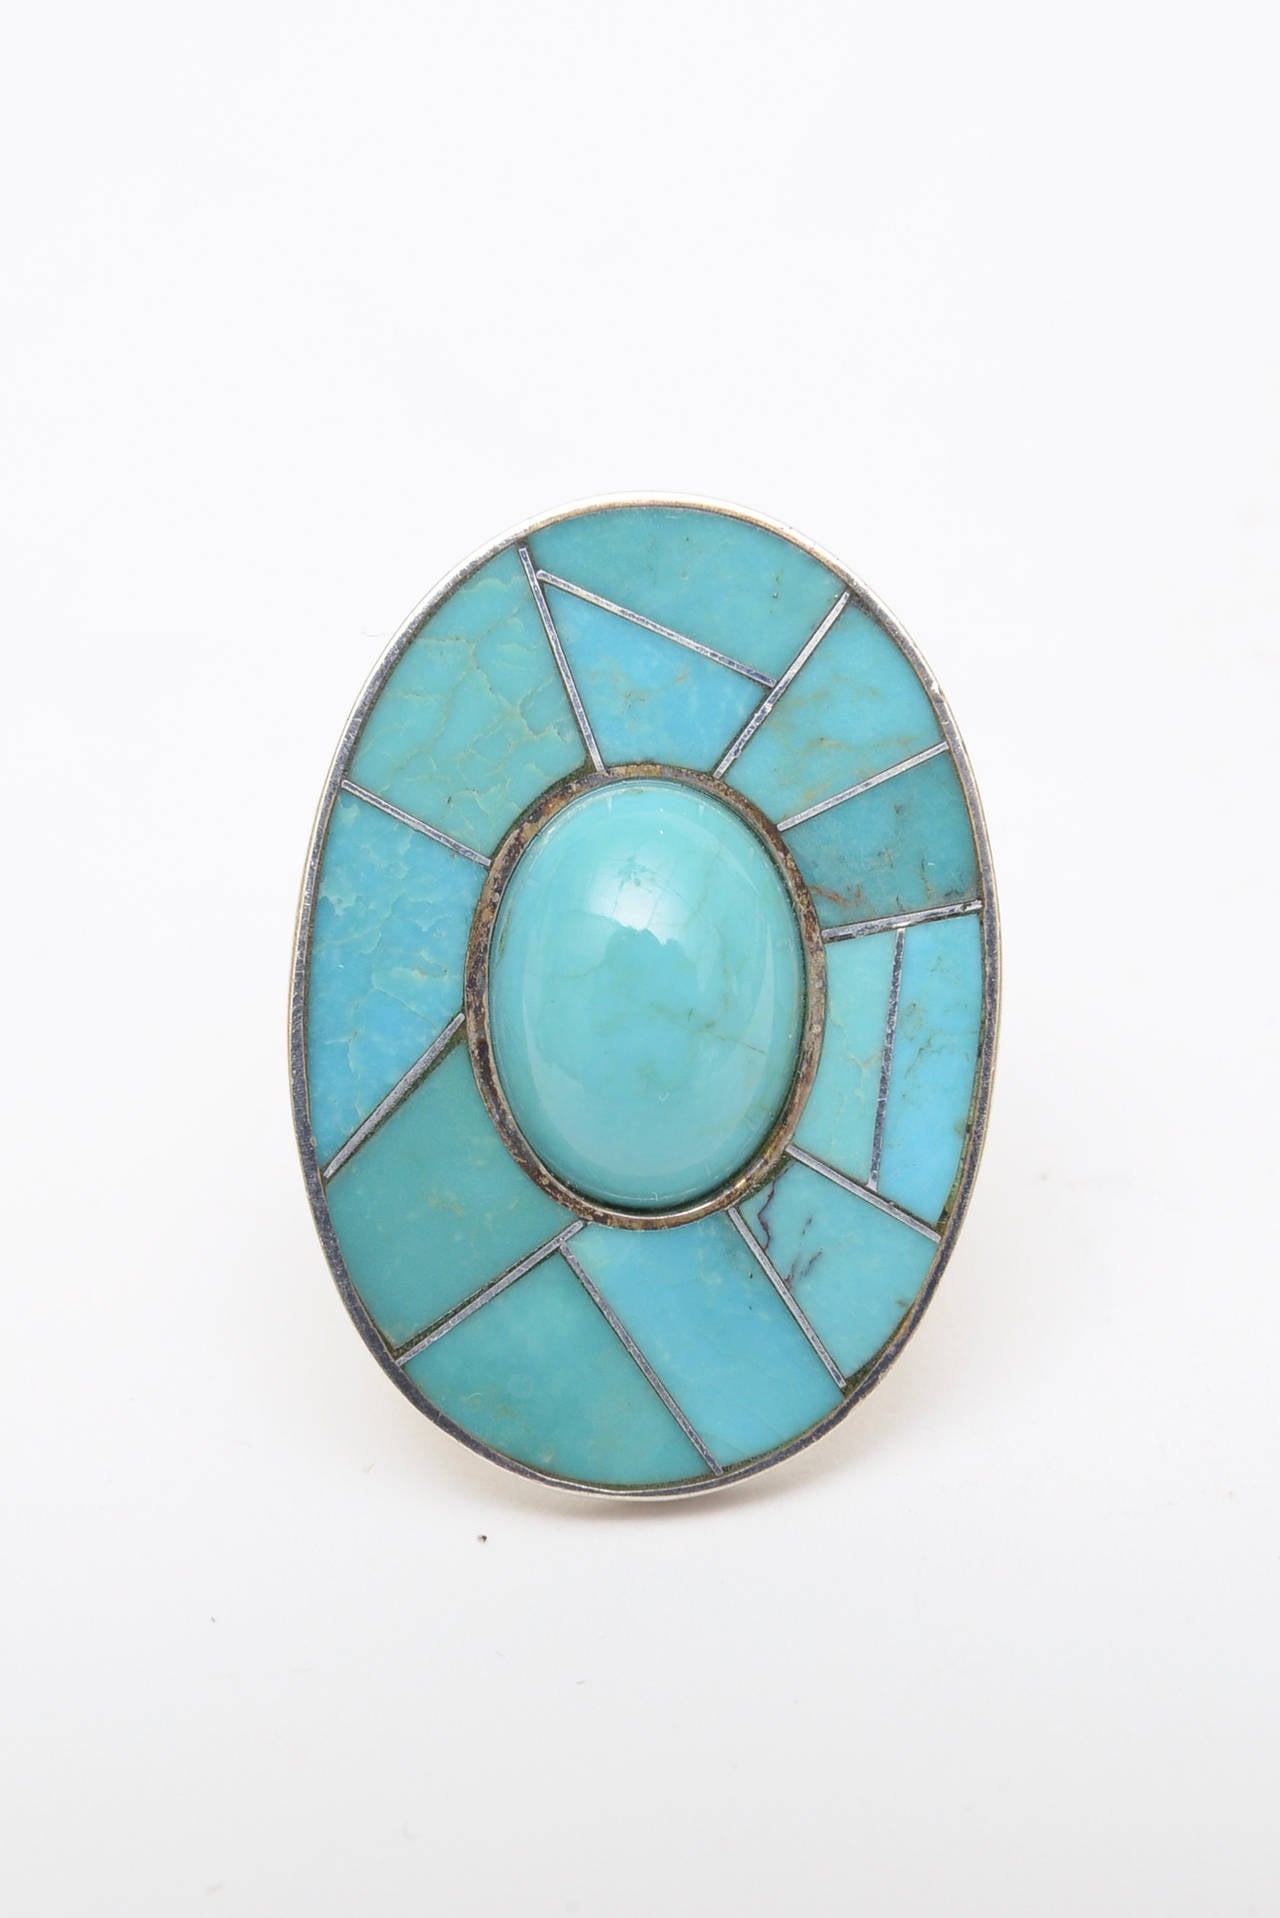 Sculptural Sterling Silver and Turquoise Ring For Sale at 1stdibs